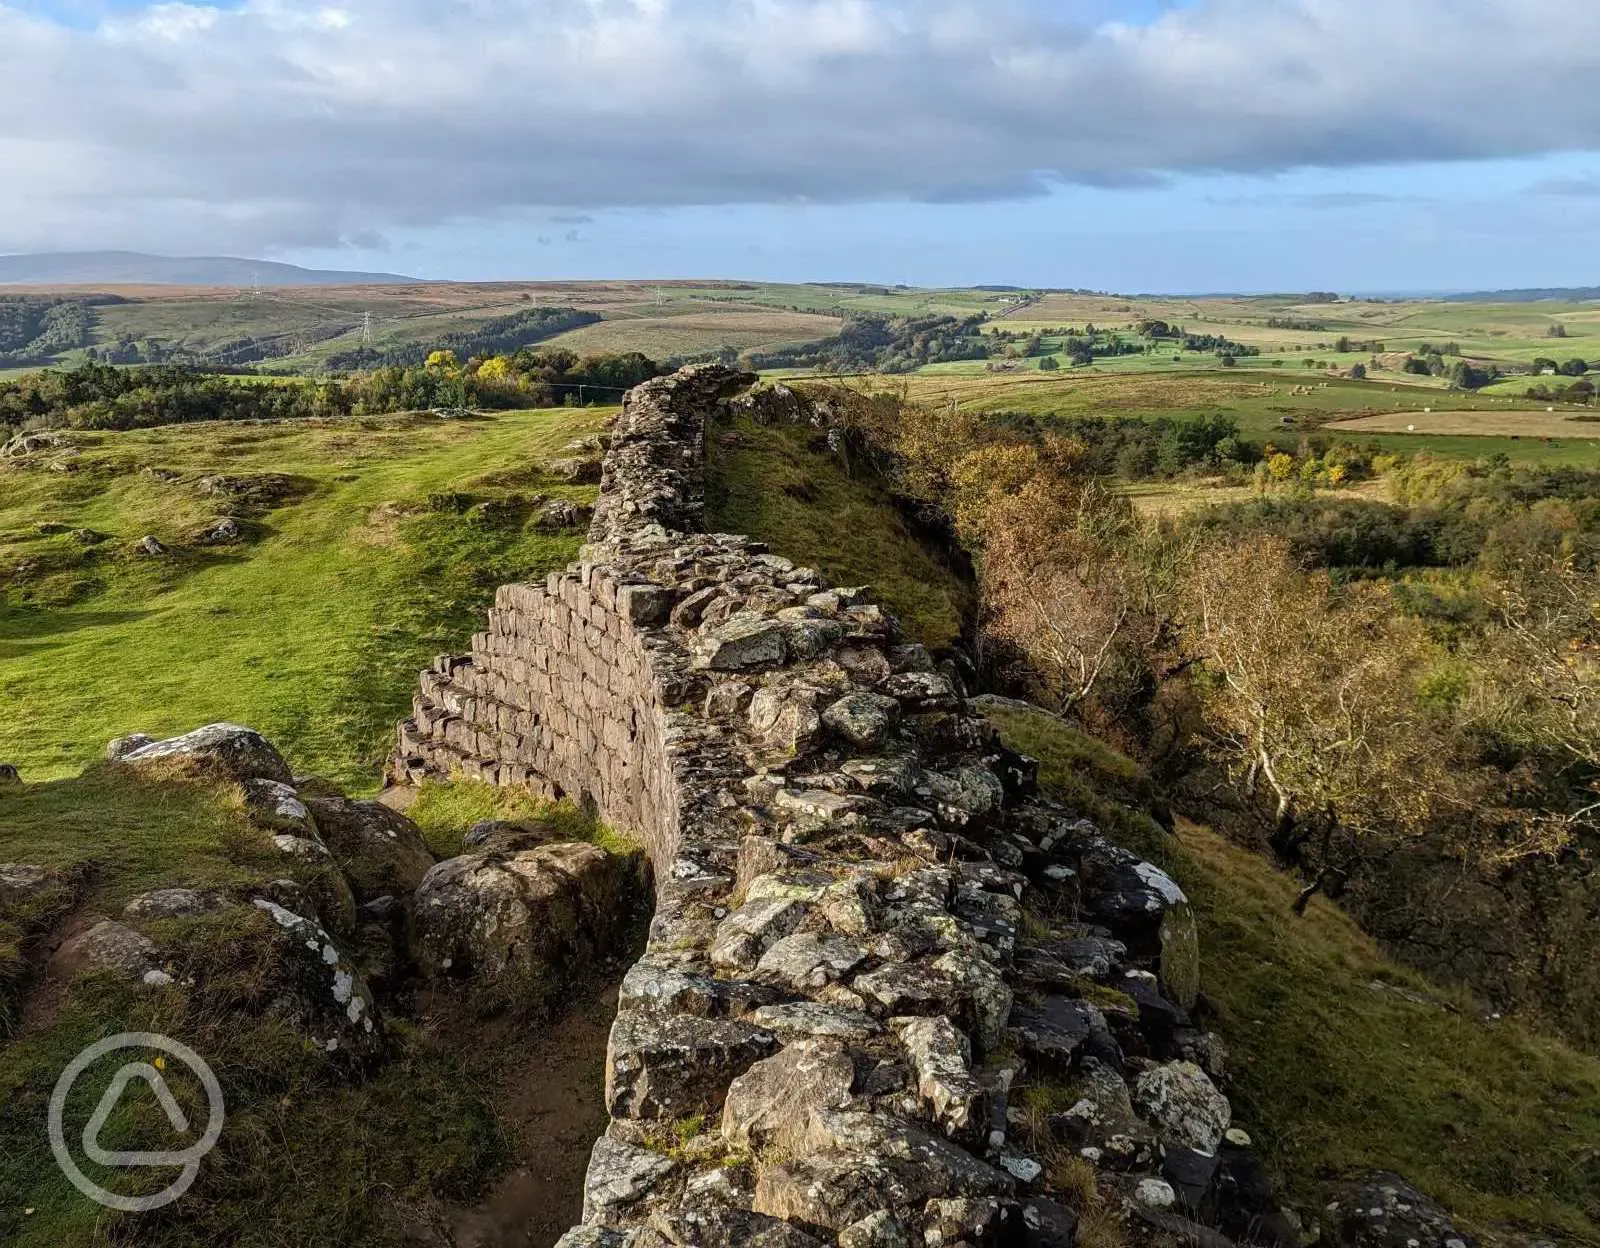 Nearby Hadrian's Wall at Walltown